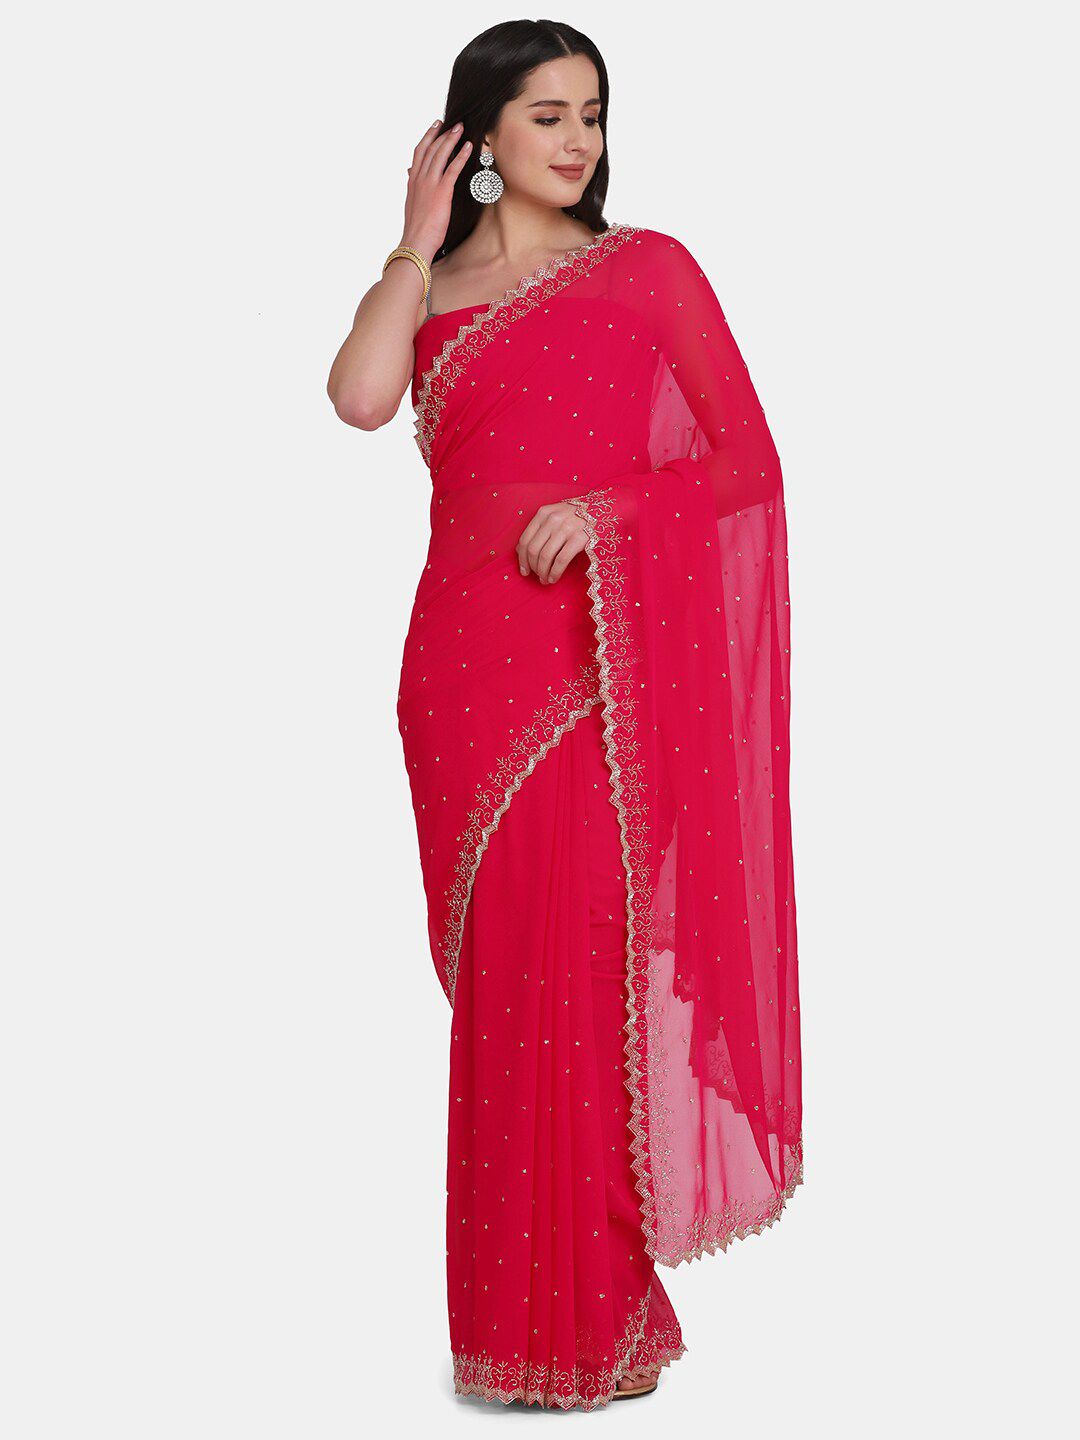 BOMBAY SELECTIONS Magenta & Silver-Toned Embellished Beads and Stones Pure Georgette Saree Price in India